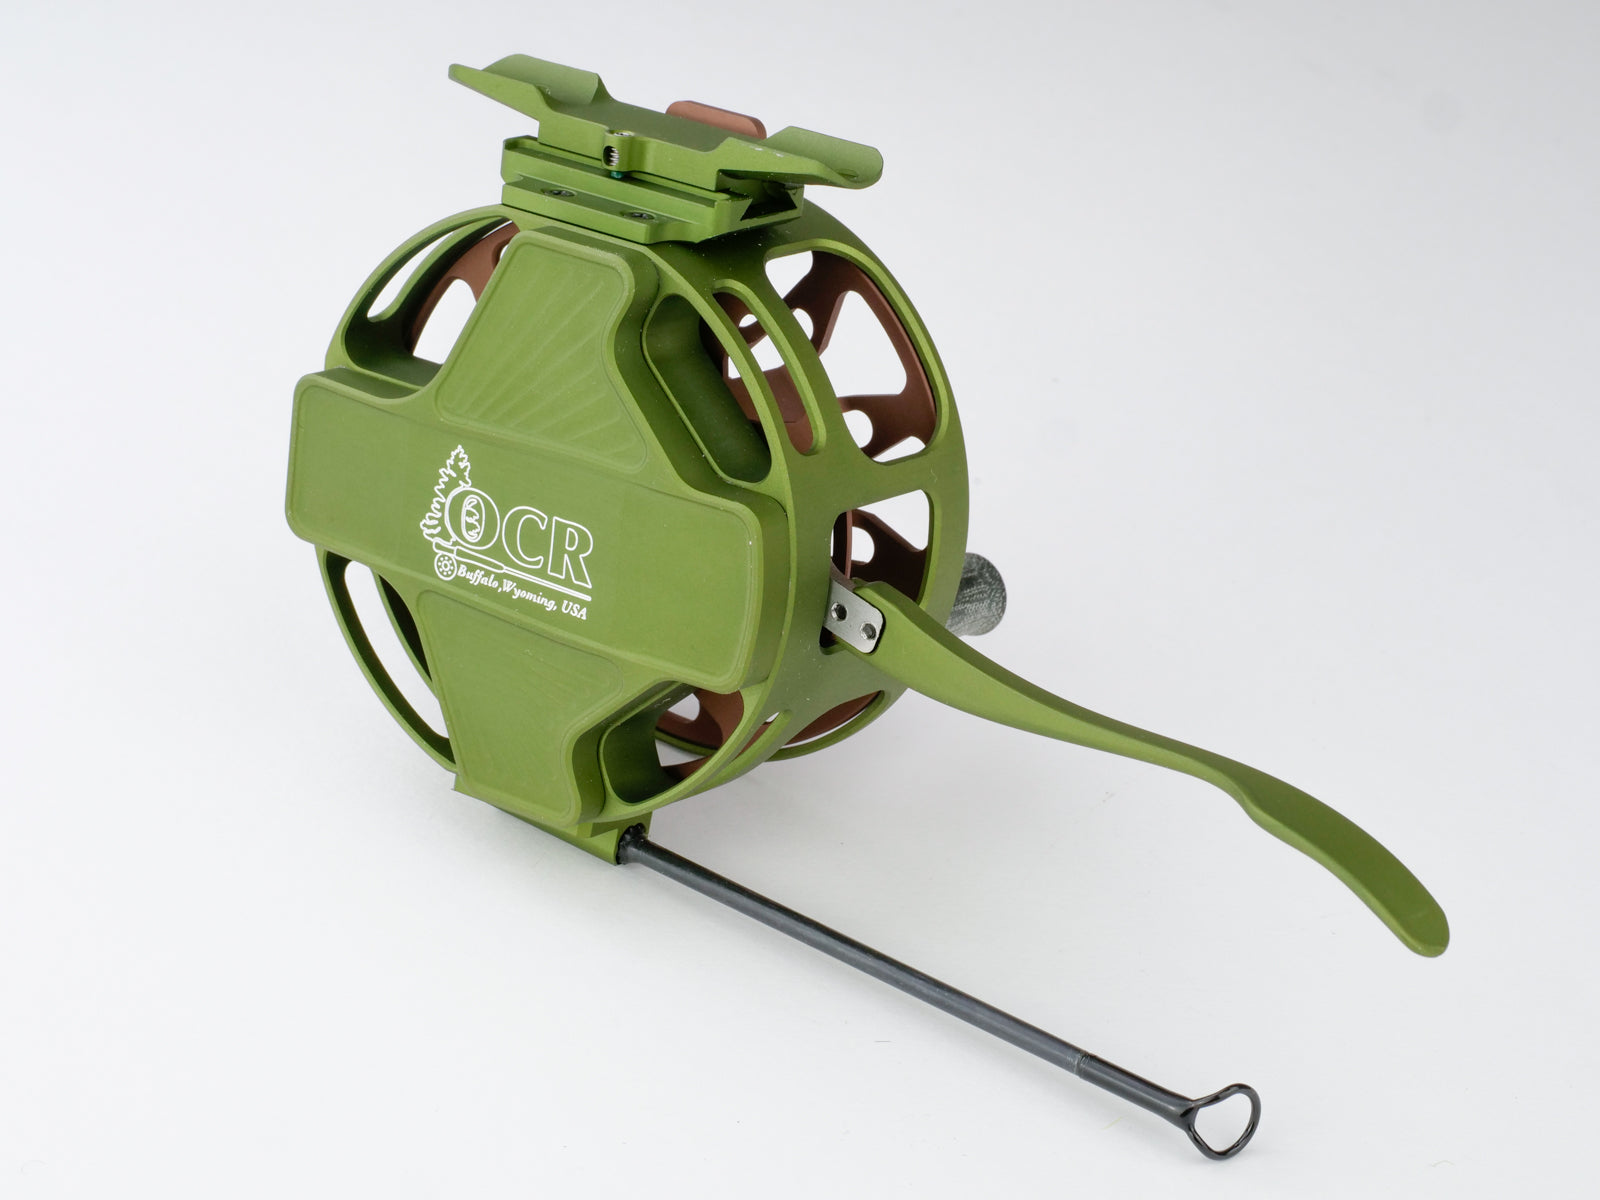 OCR Bighorn Semi-Automatic Fly Reel – Tactical Fly Fisher